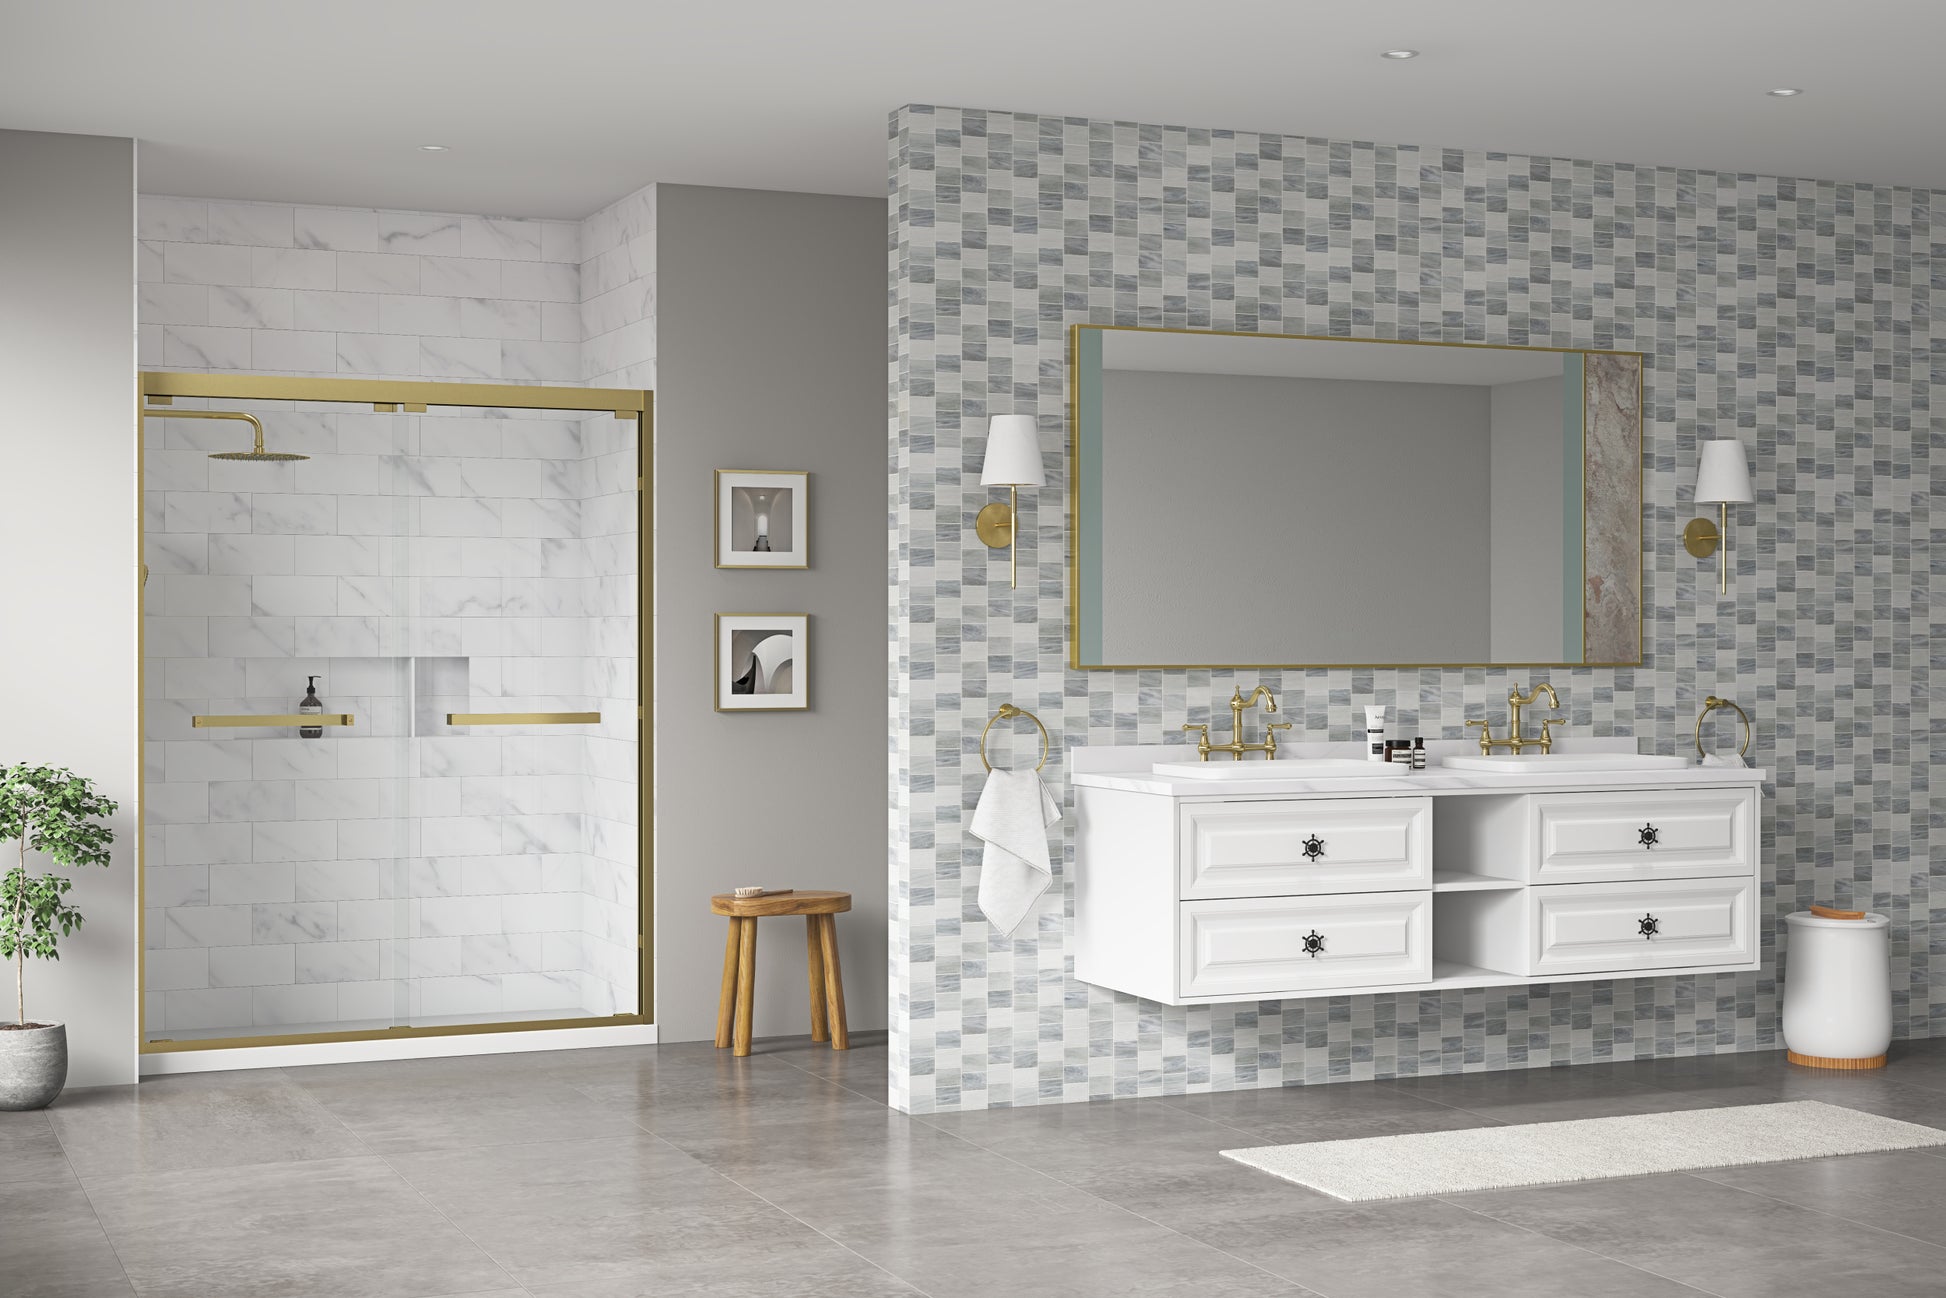 72*23*21in Wall Hung Doulble Sink Bath Vanity Cabinet white-abs+steel(q235)+wood+pvc